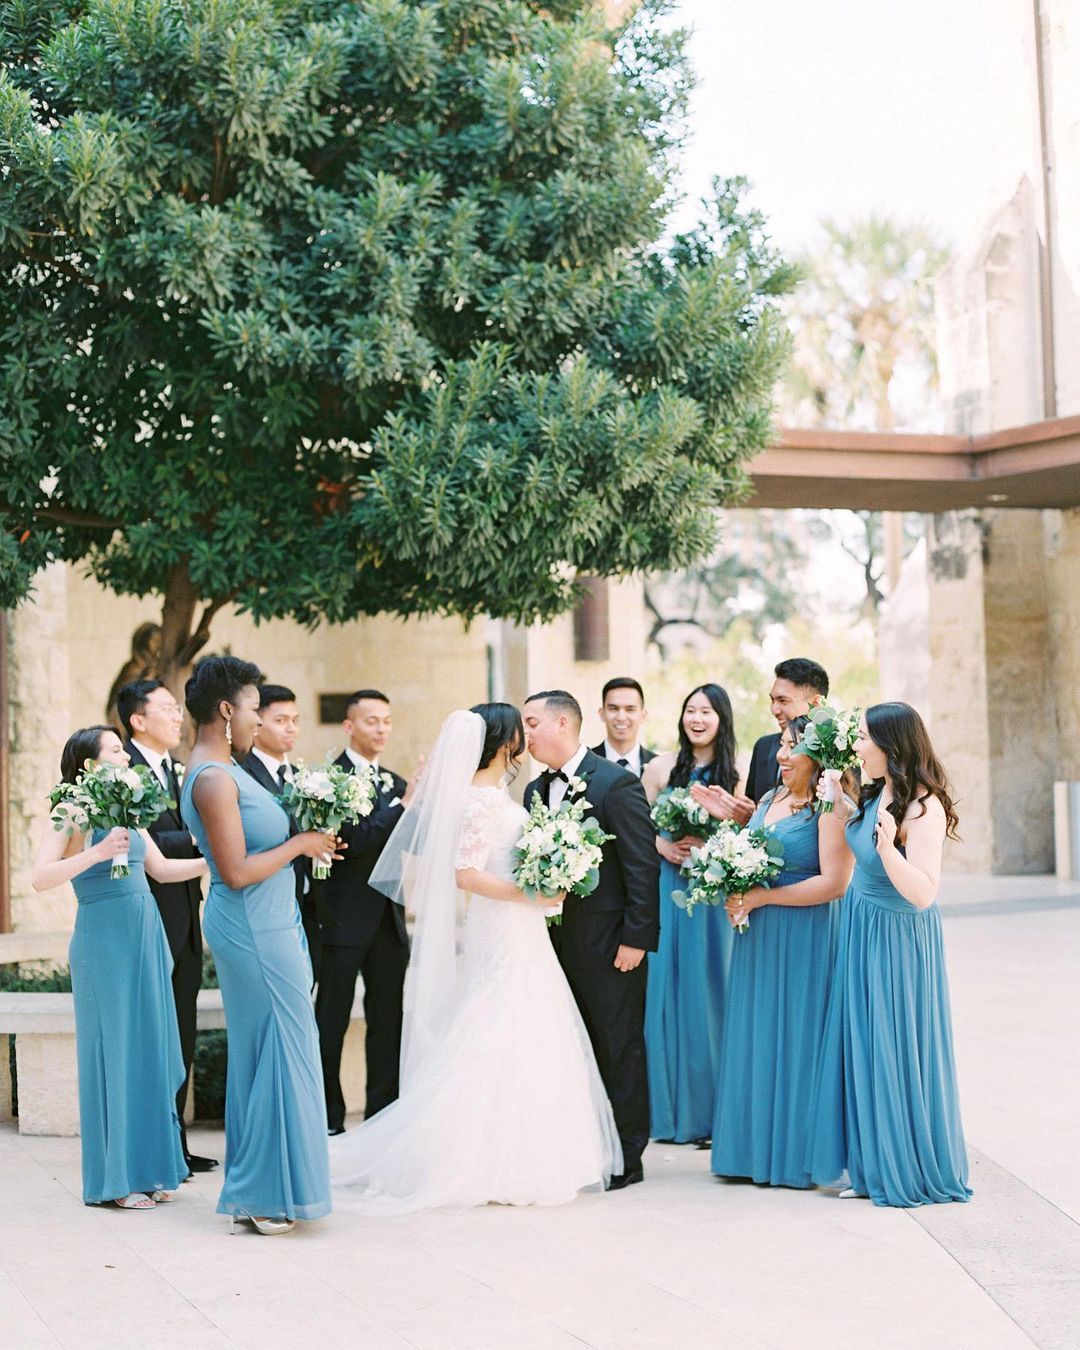 wedding party with bridesmaids wearing blue dresses